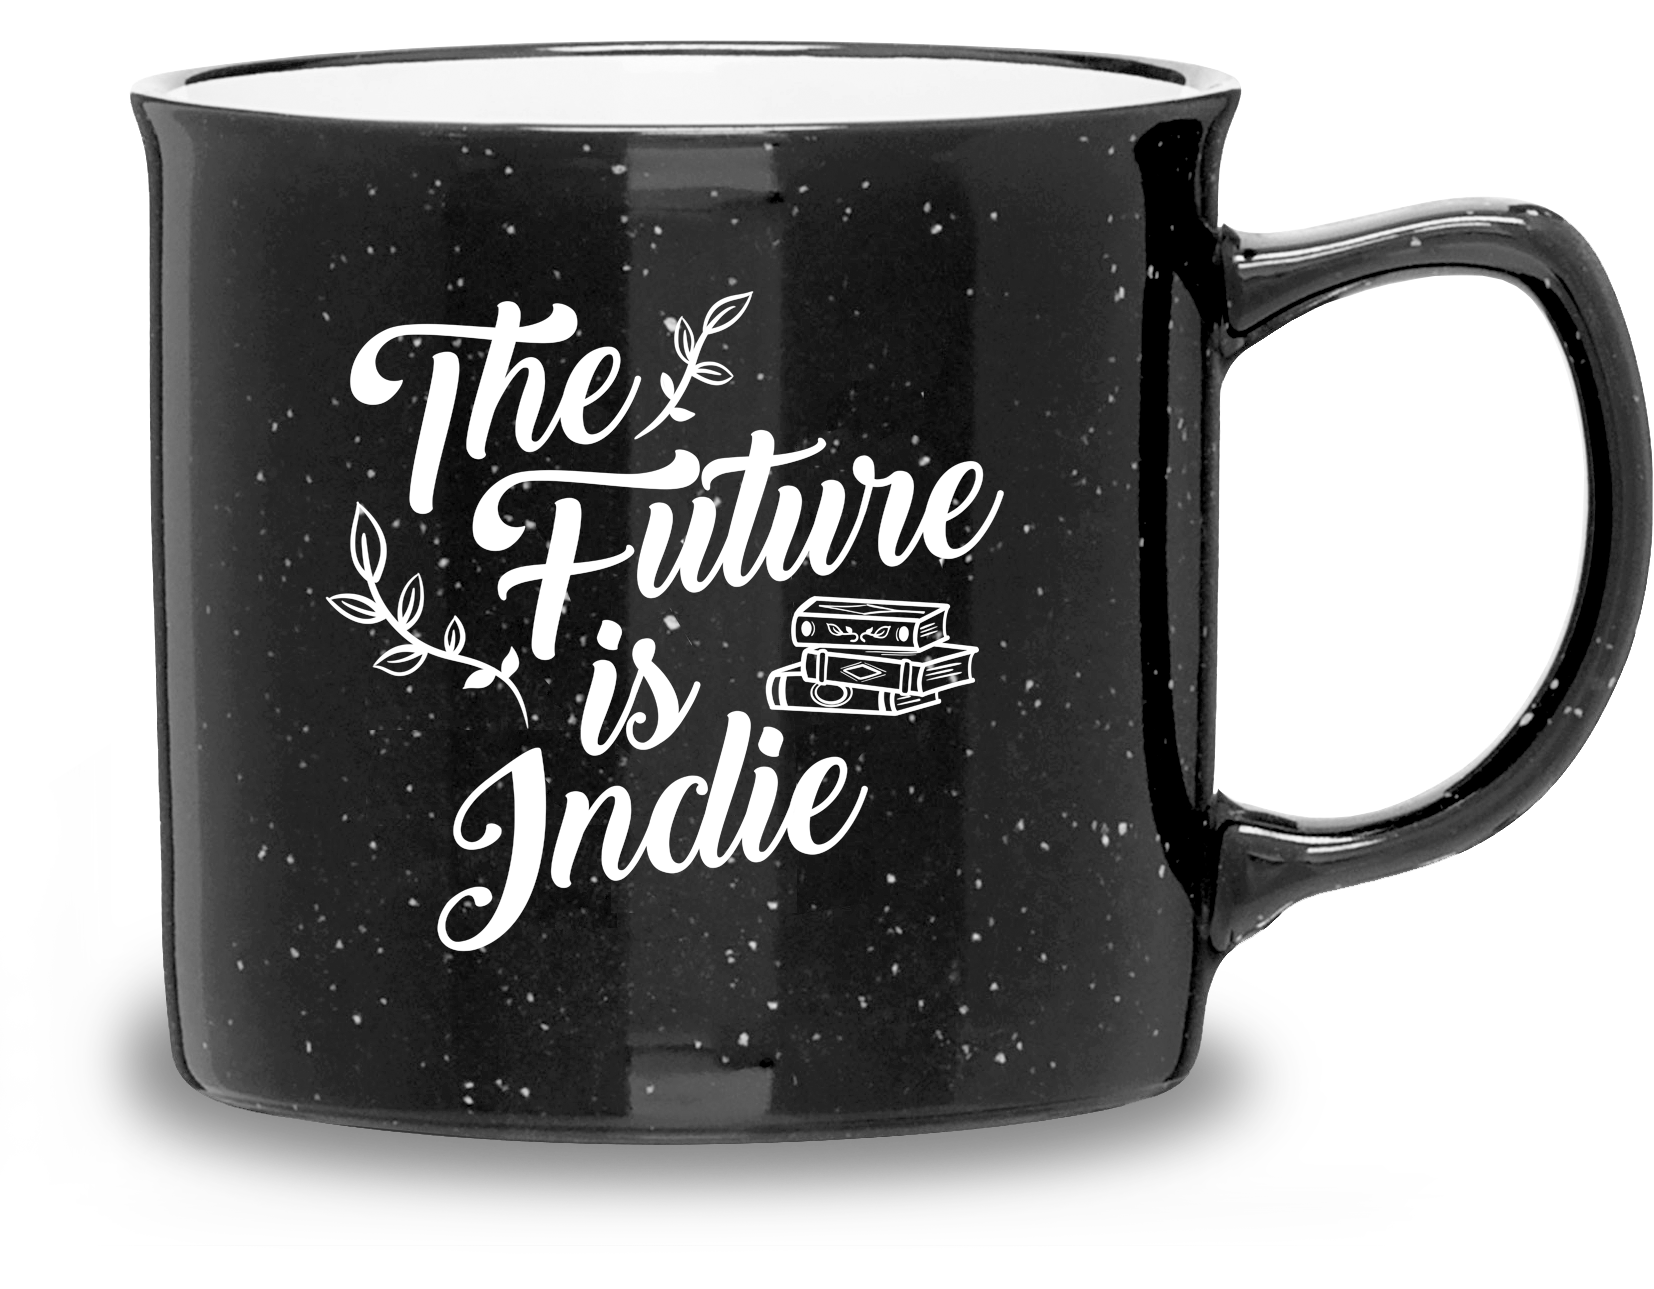 Indie Bookstore Day "The Future is Indie" Mug